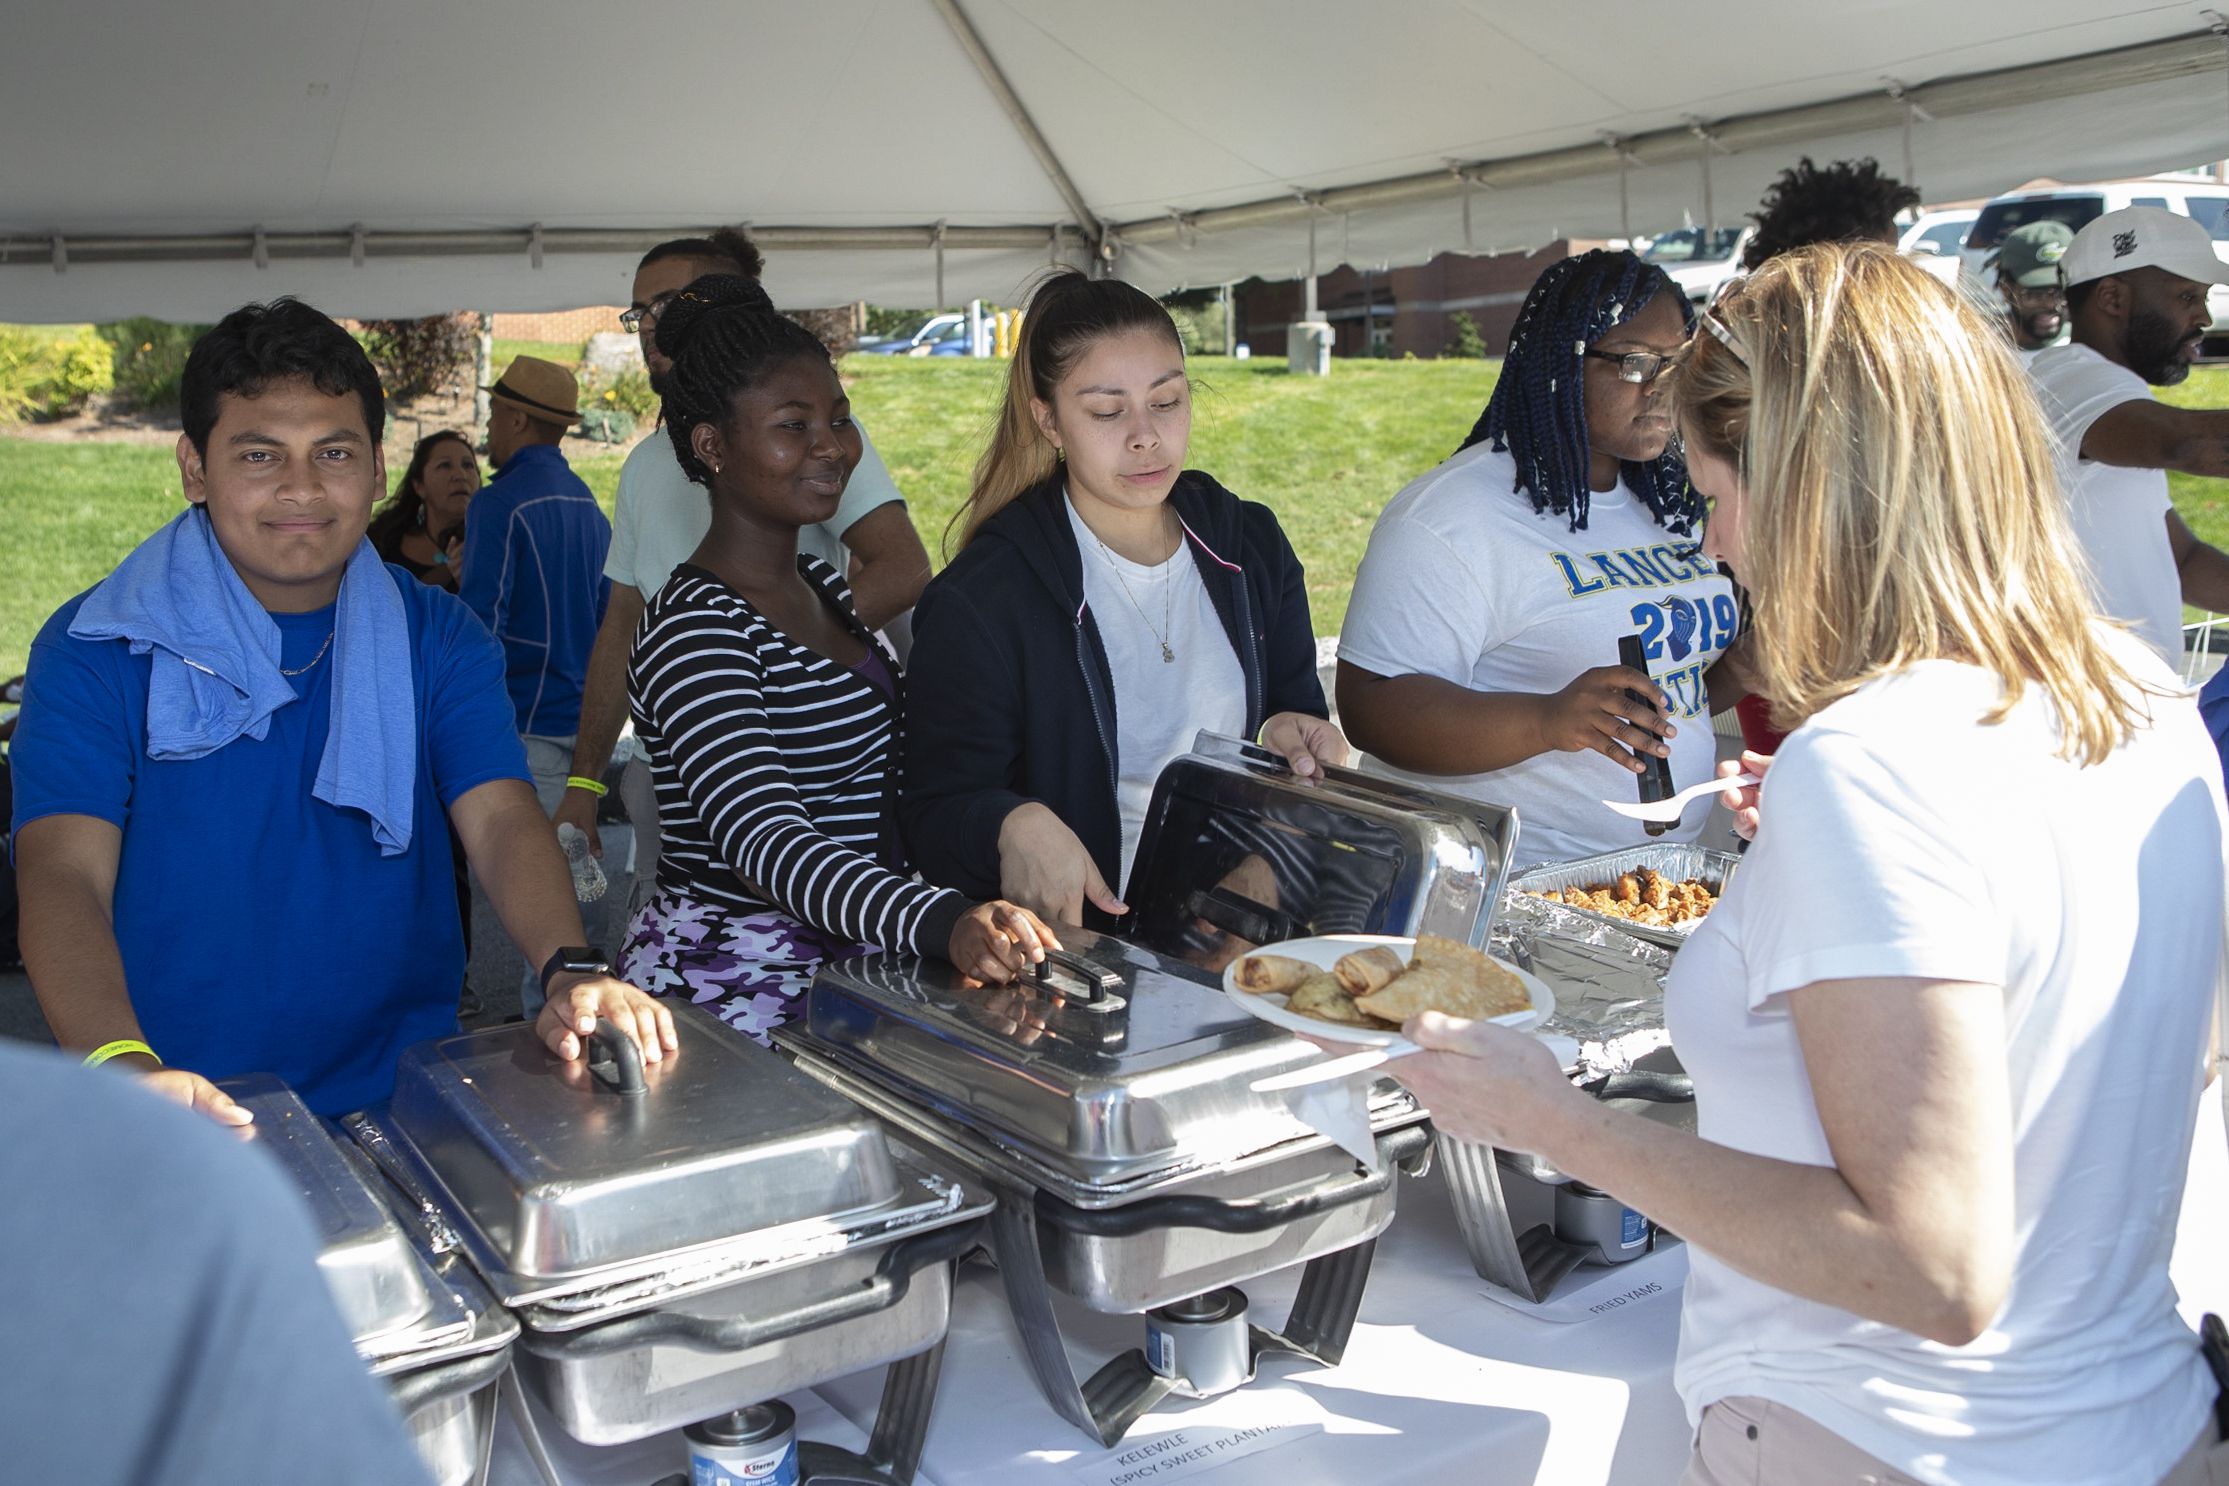 Students serving each other food under a tent outside during homecoming